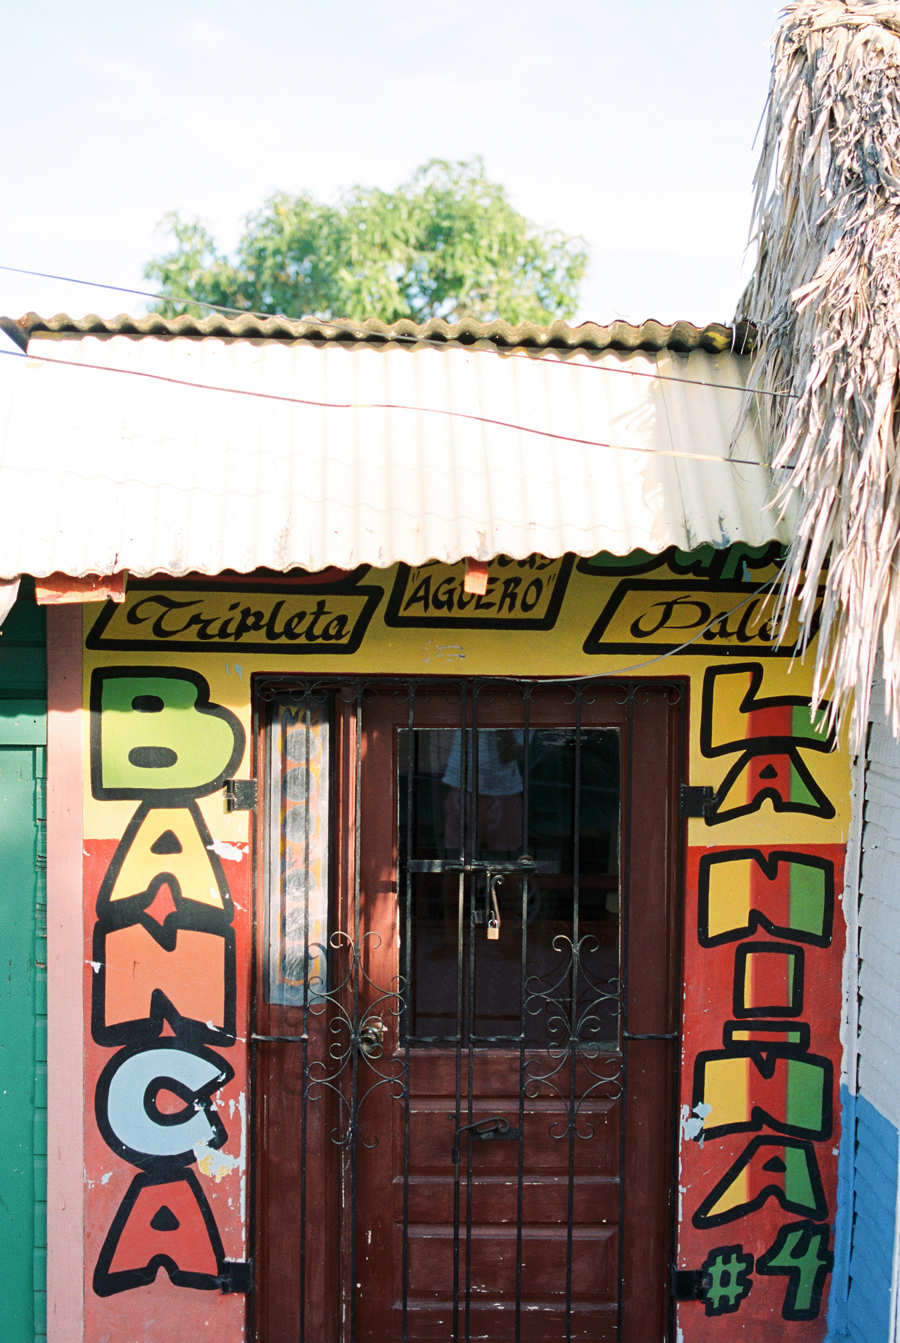 Colorful Storefront in the Dominican Republic